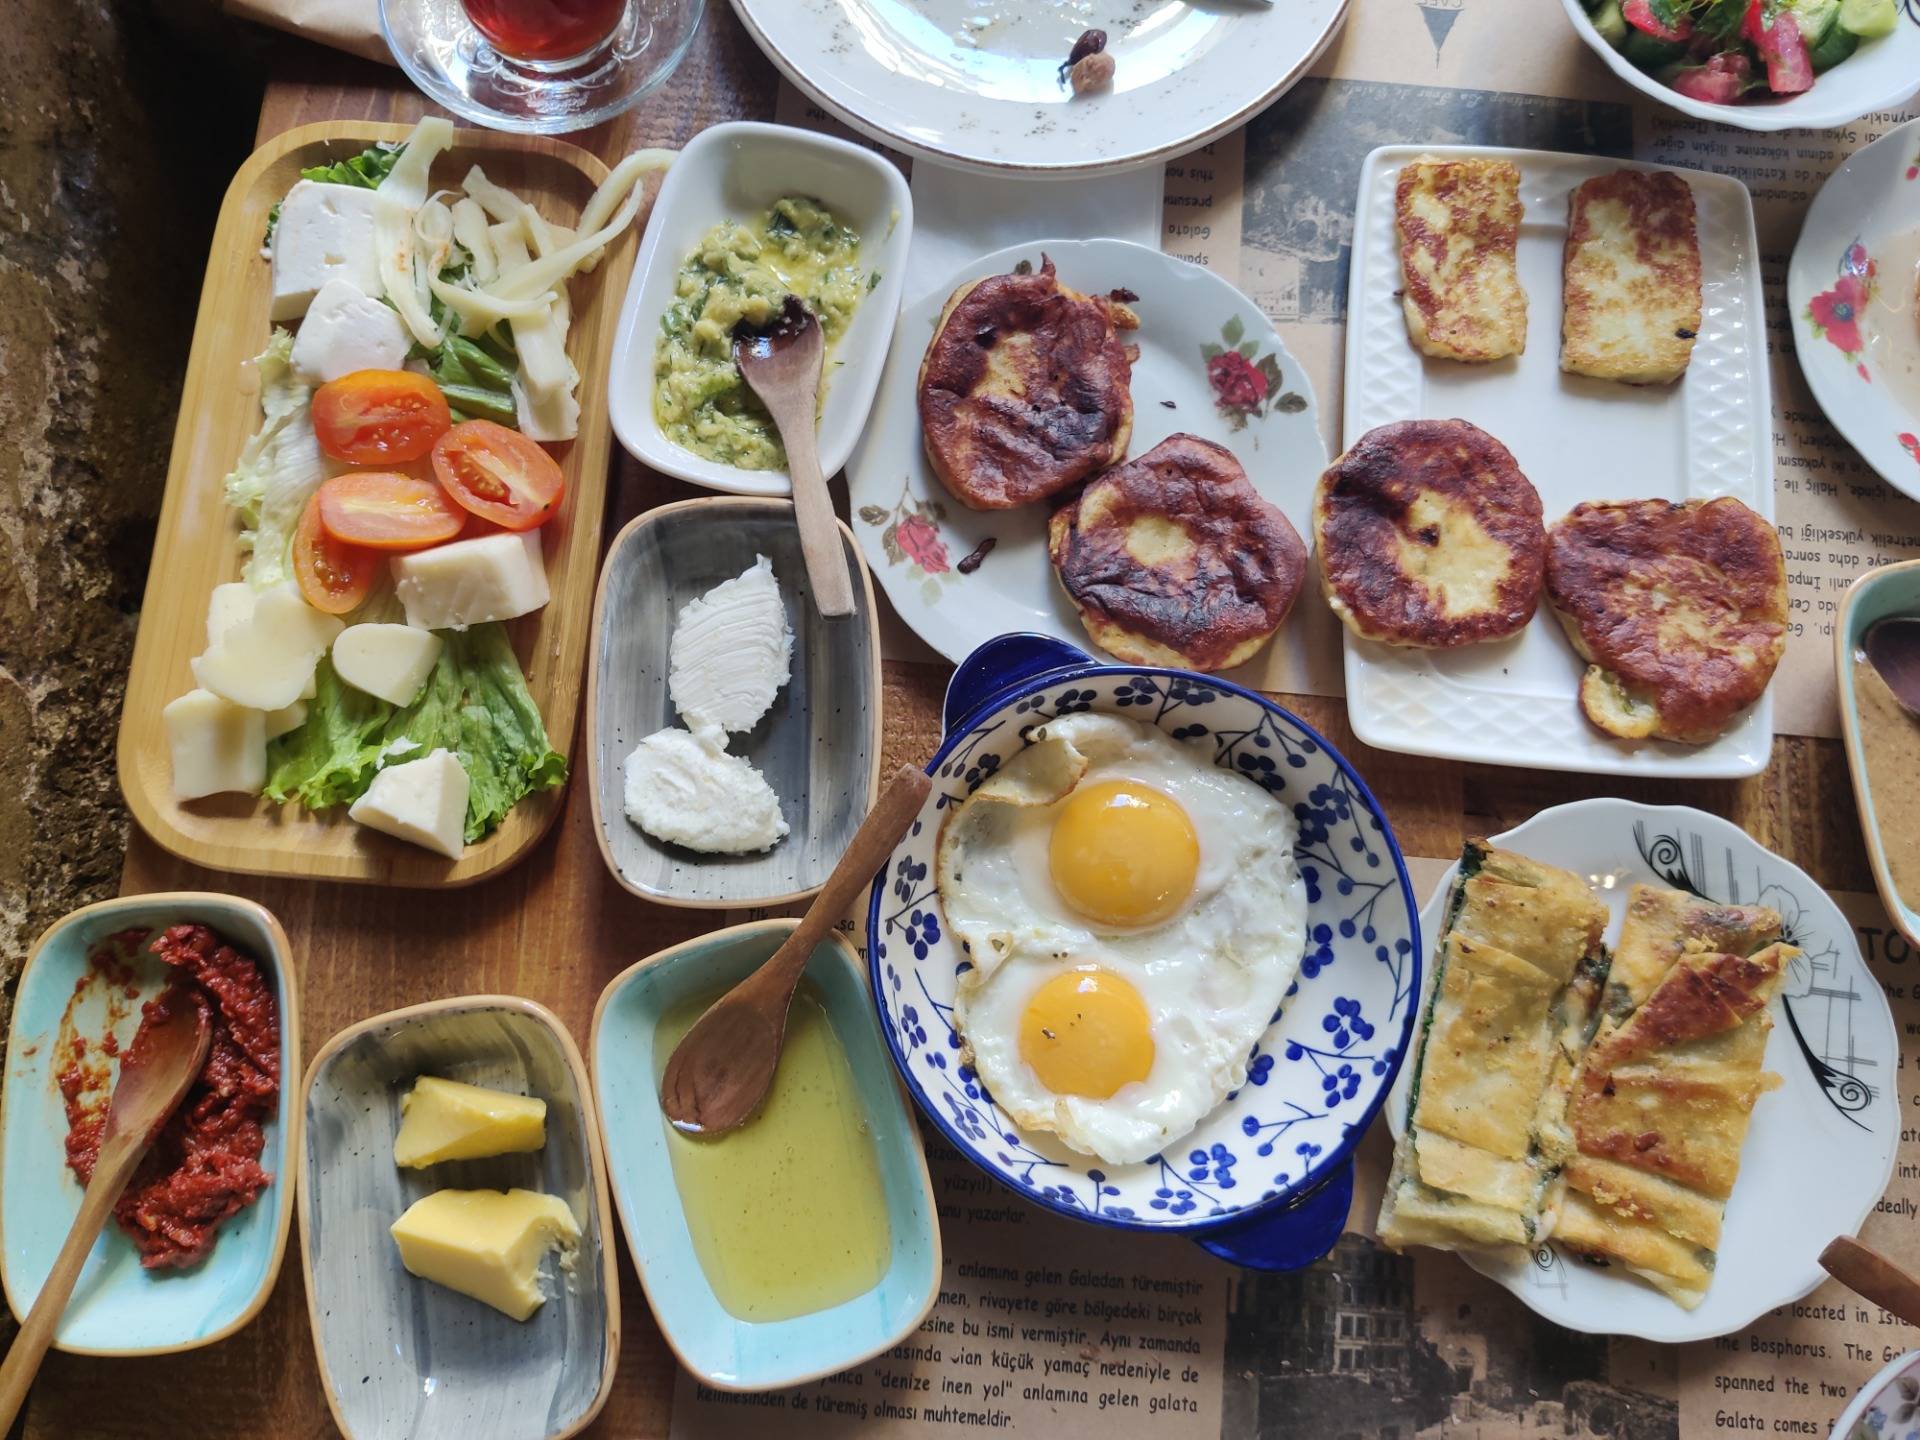 Take your morning slow with this feast! Village breakfast for 2 at Cafe Privato near Galata Tower